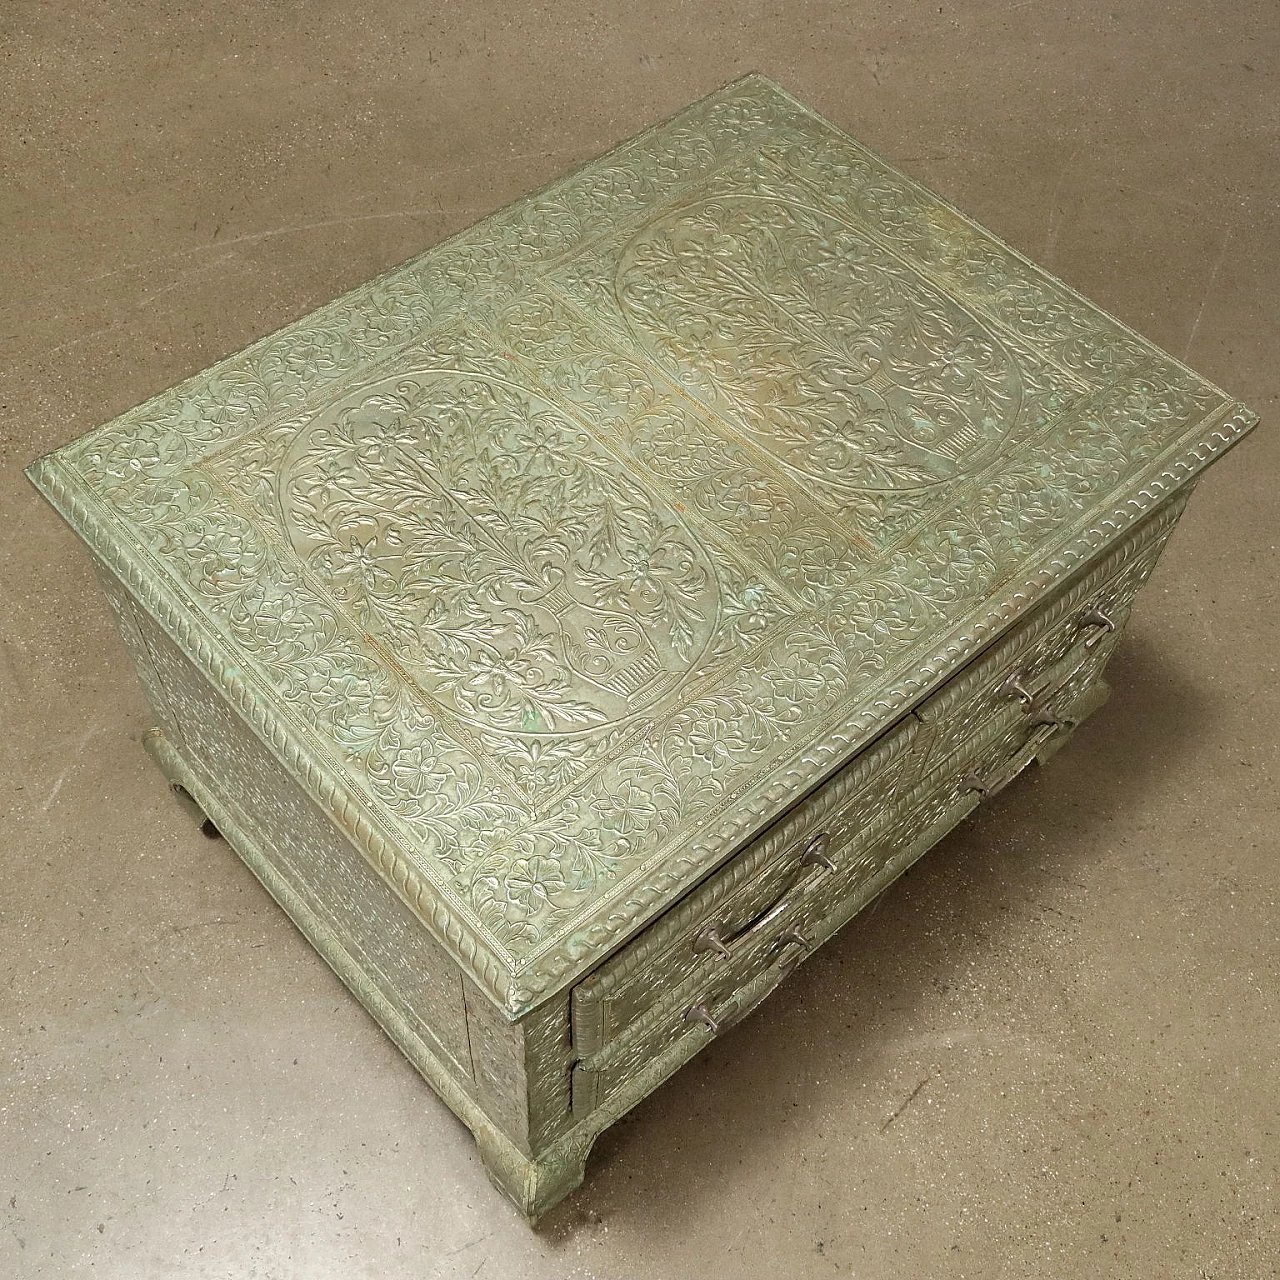 Pair of bedside tables covered with embossed silvered metal plate 8